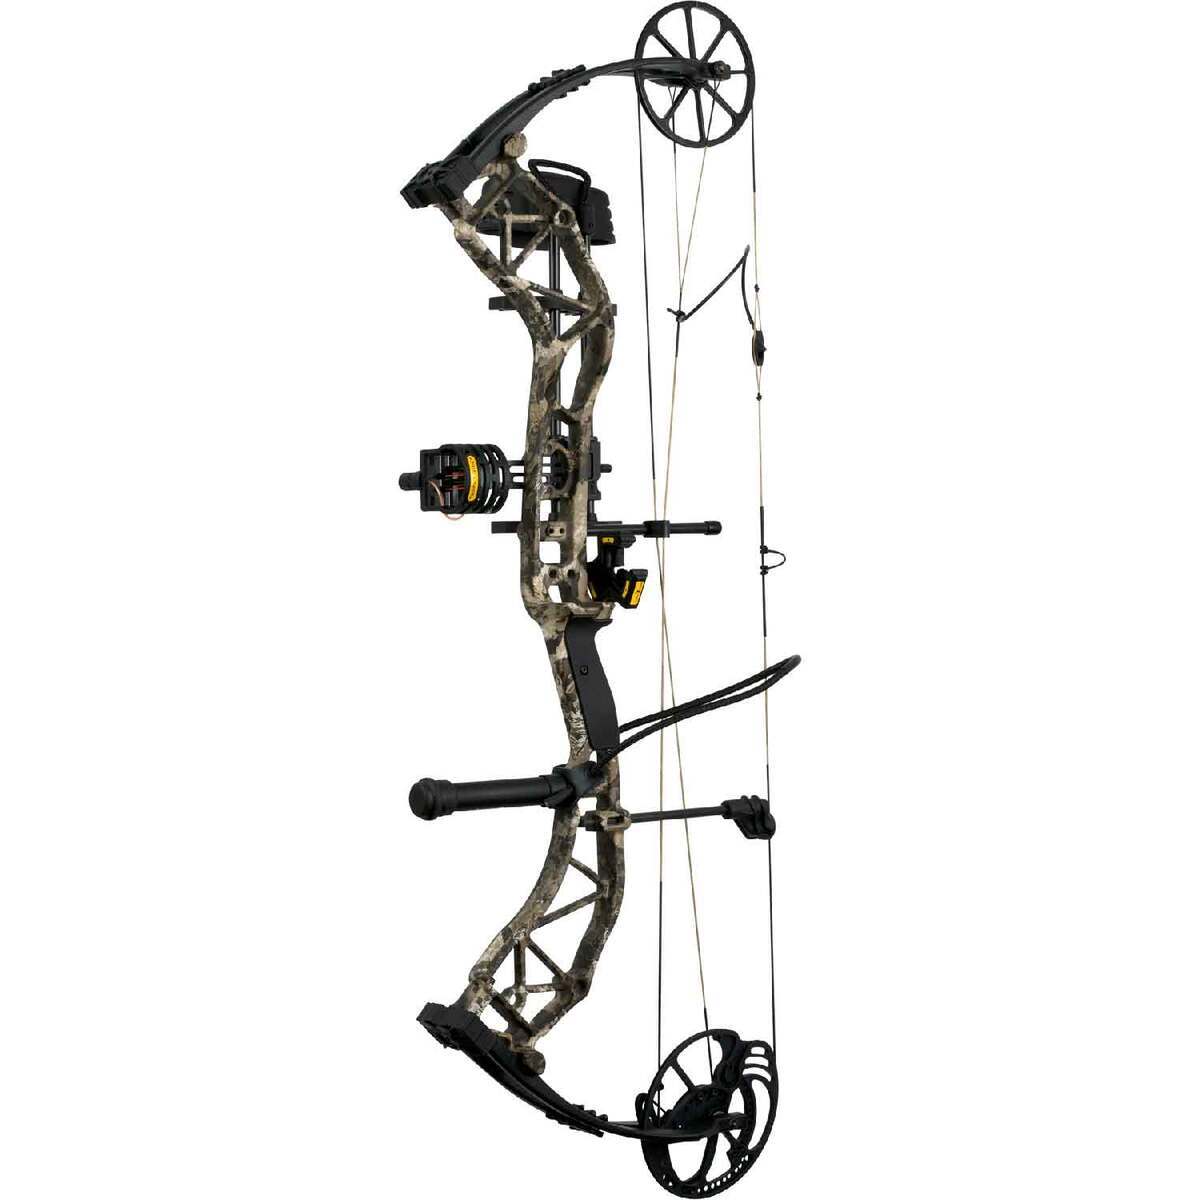 31in in. Draw Length Archery Compound Bows 55lbs lbs. Draw Weight